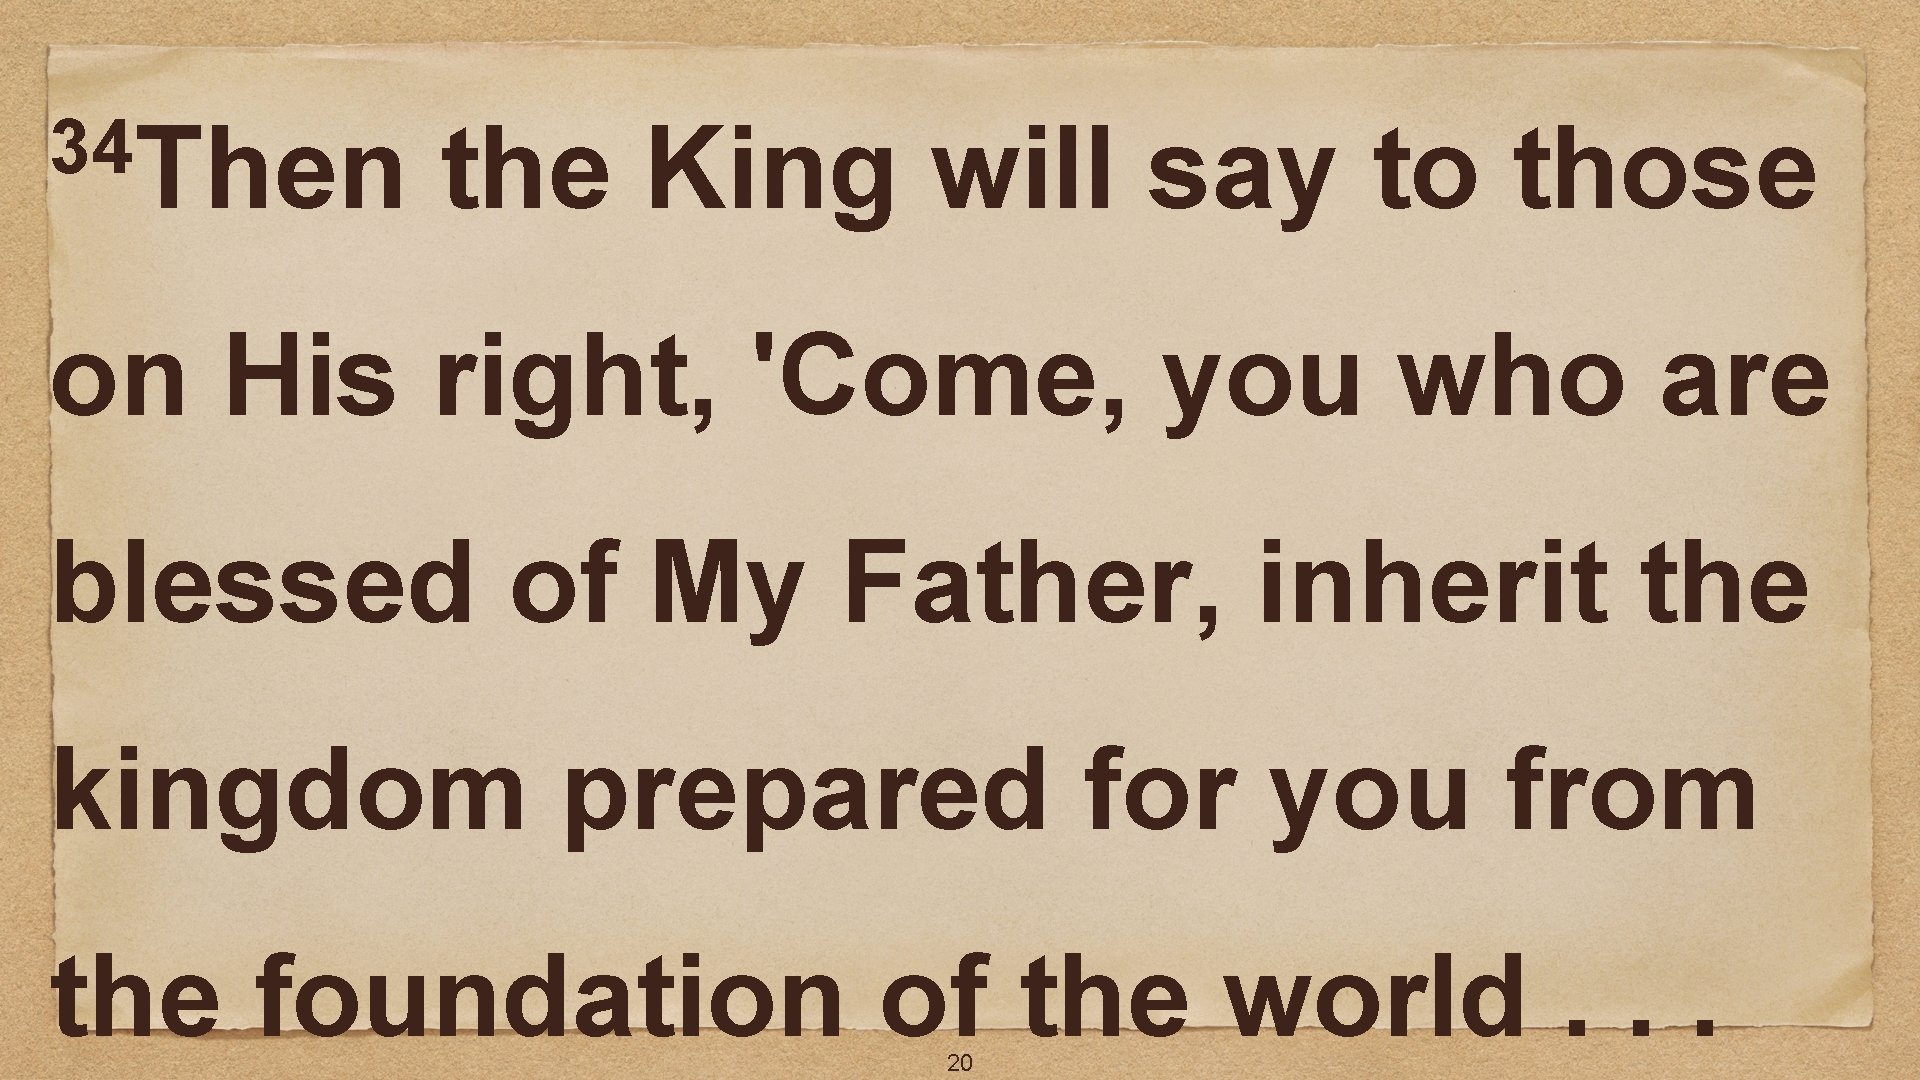 34 Then the King will say to those on His right, 'Come, you who